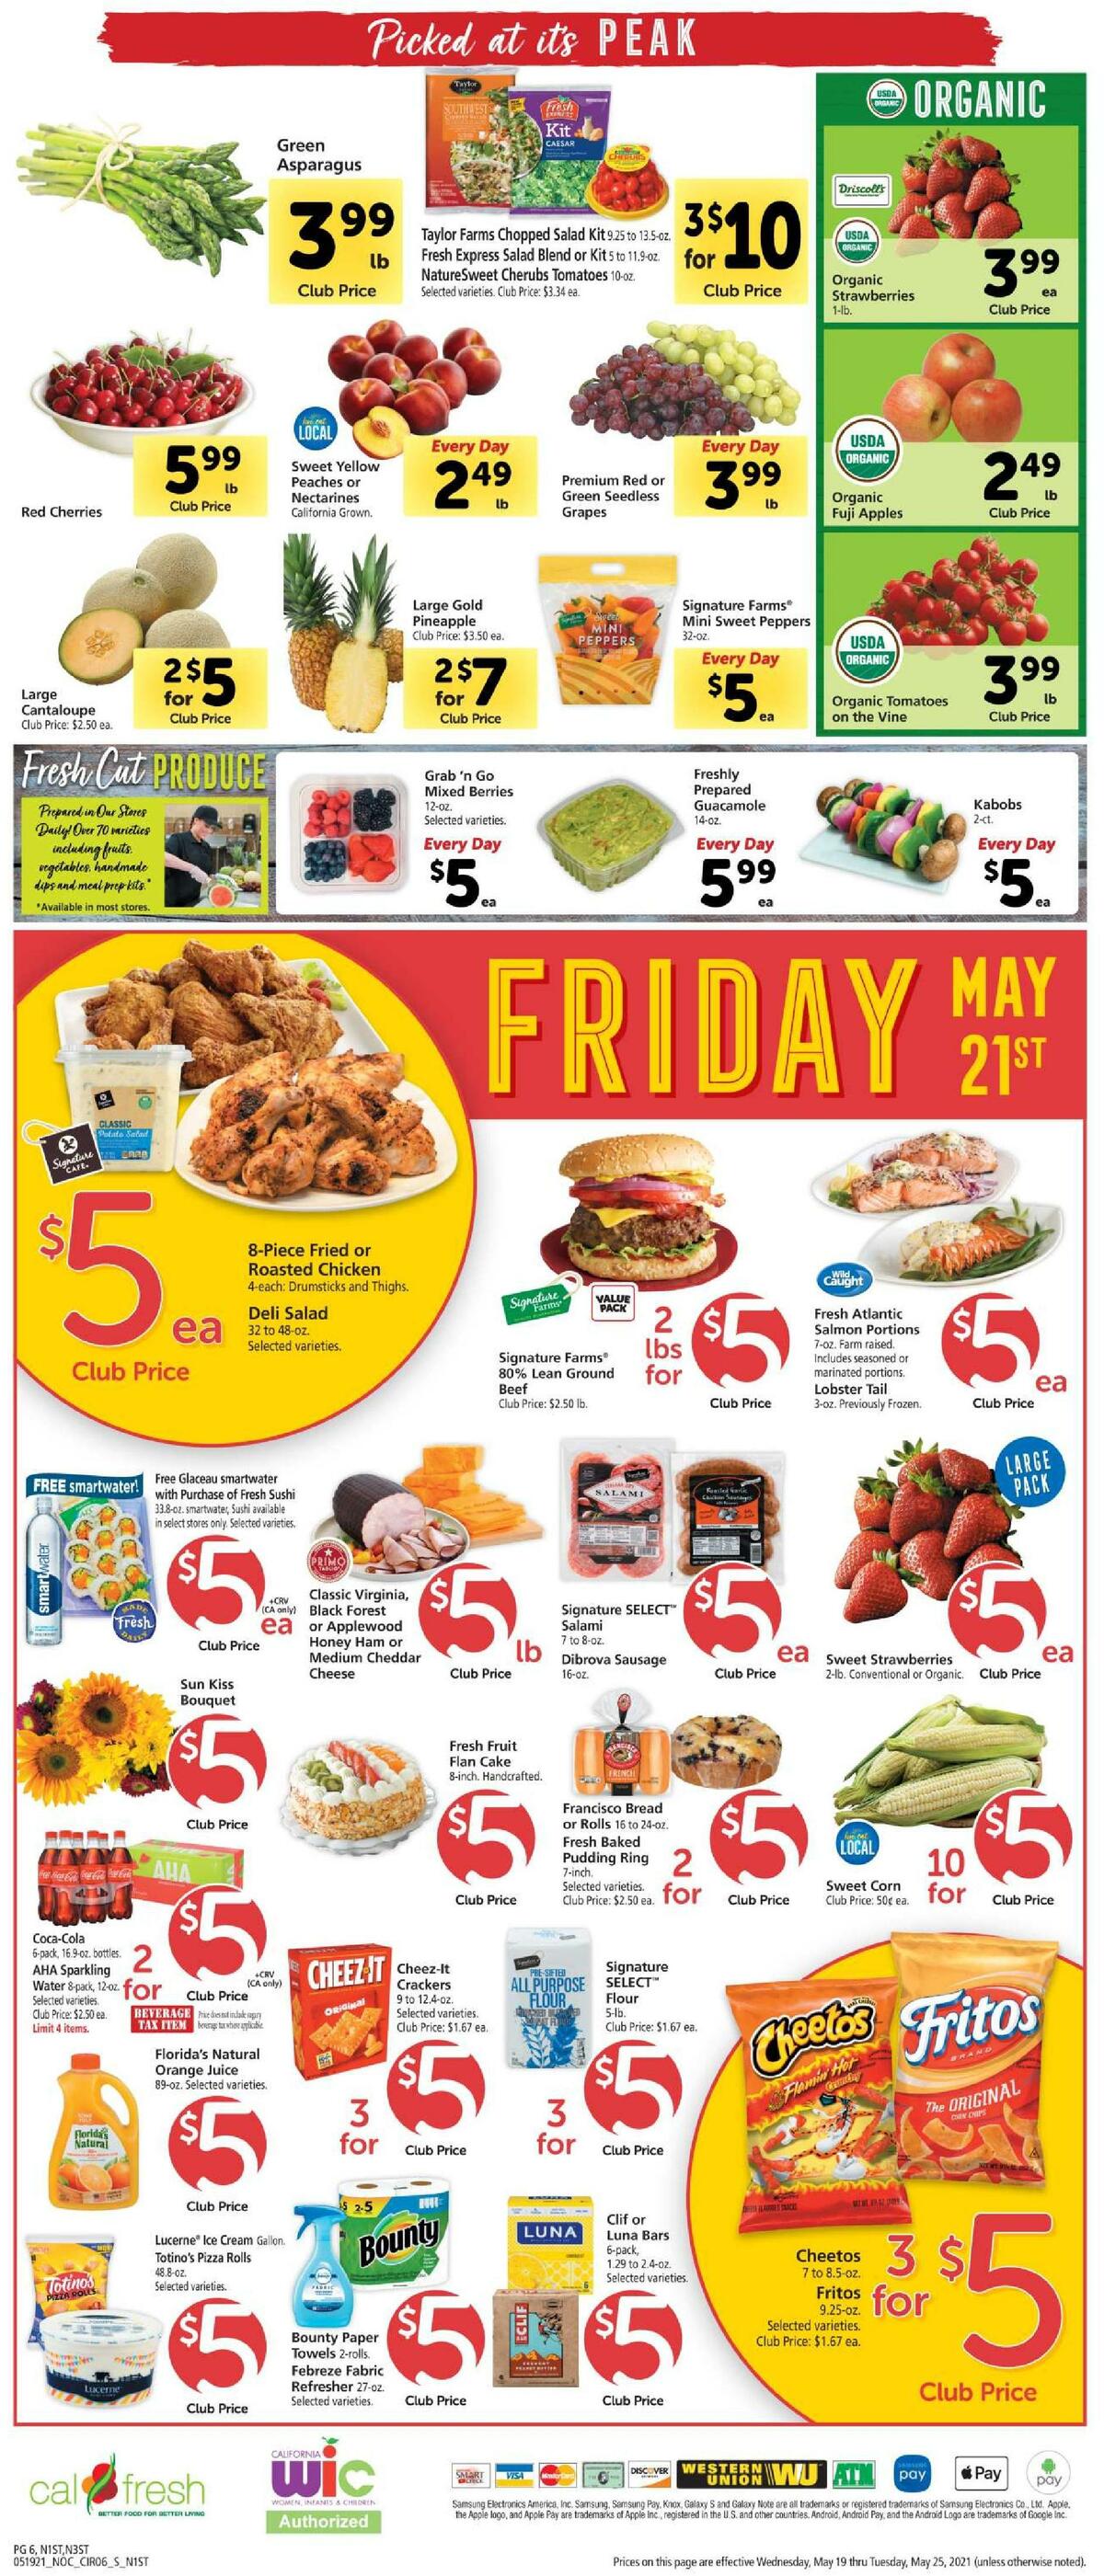 Safeway Weekly Ads & Special Buys from May 19 Page 6